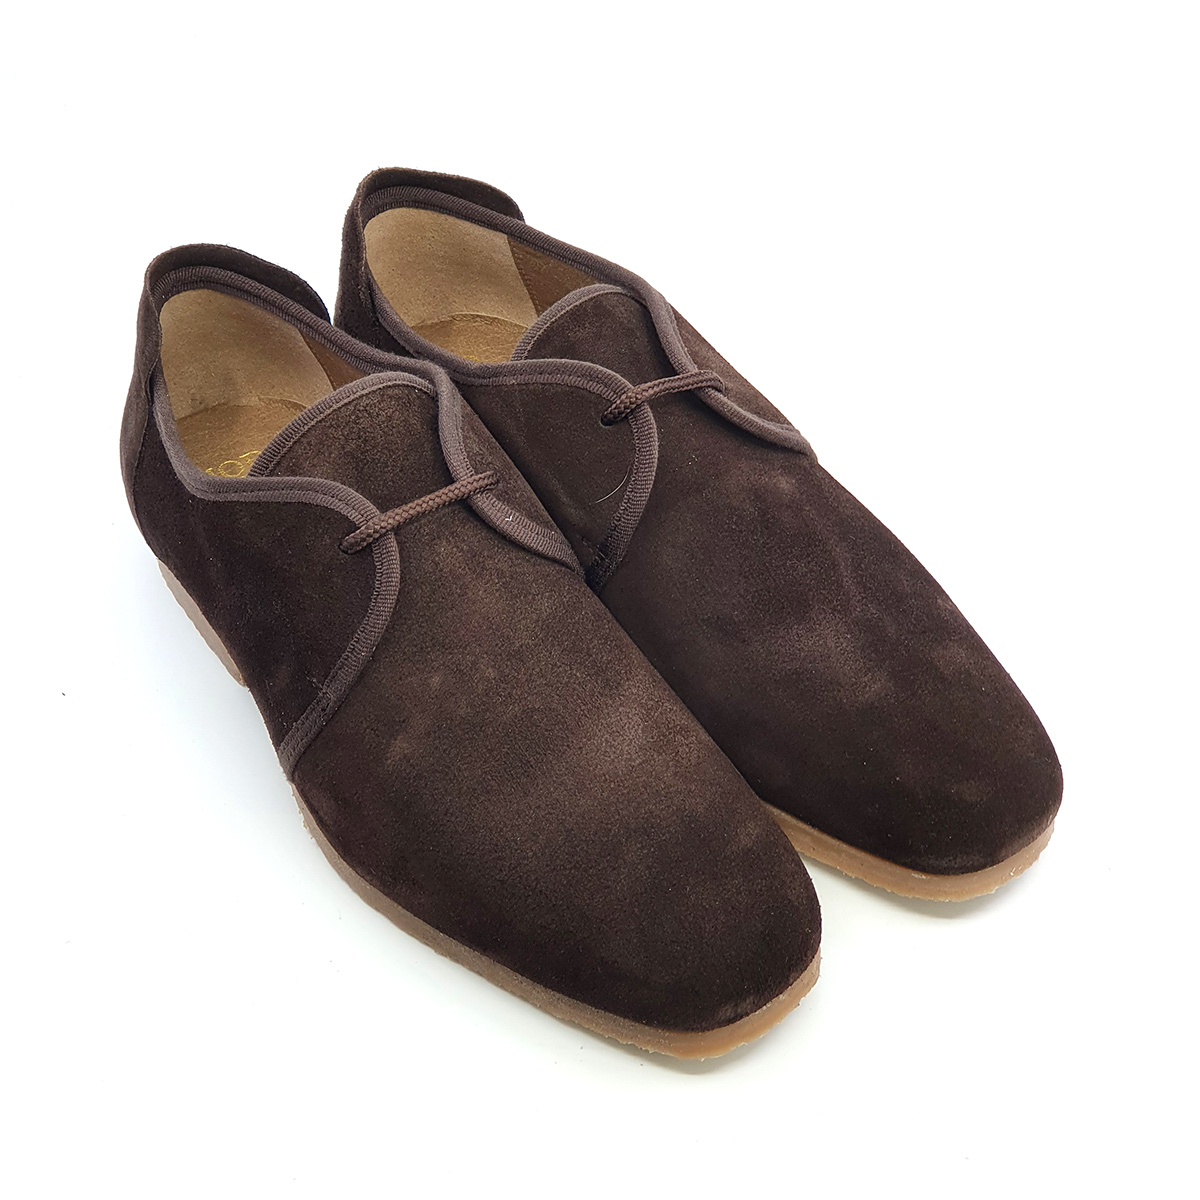 The “Terry Rawlings” Shoe in Chocolate Suede – Mod Shoes